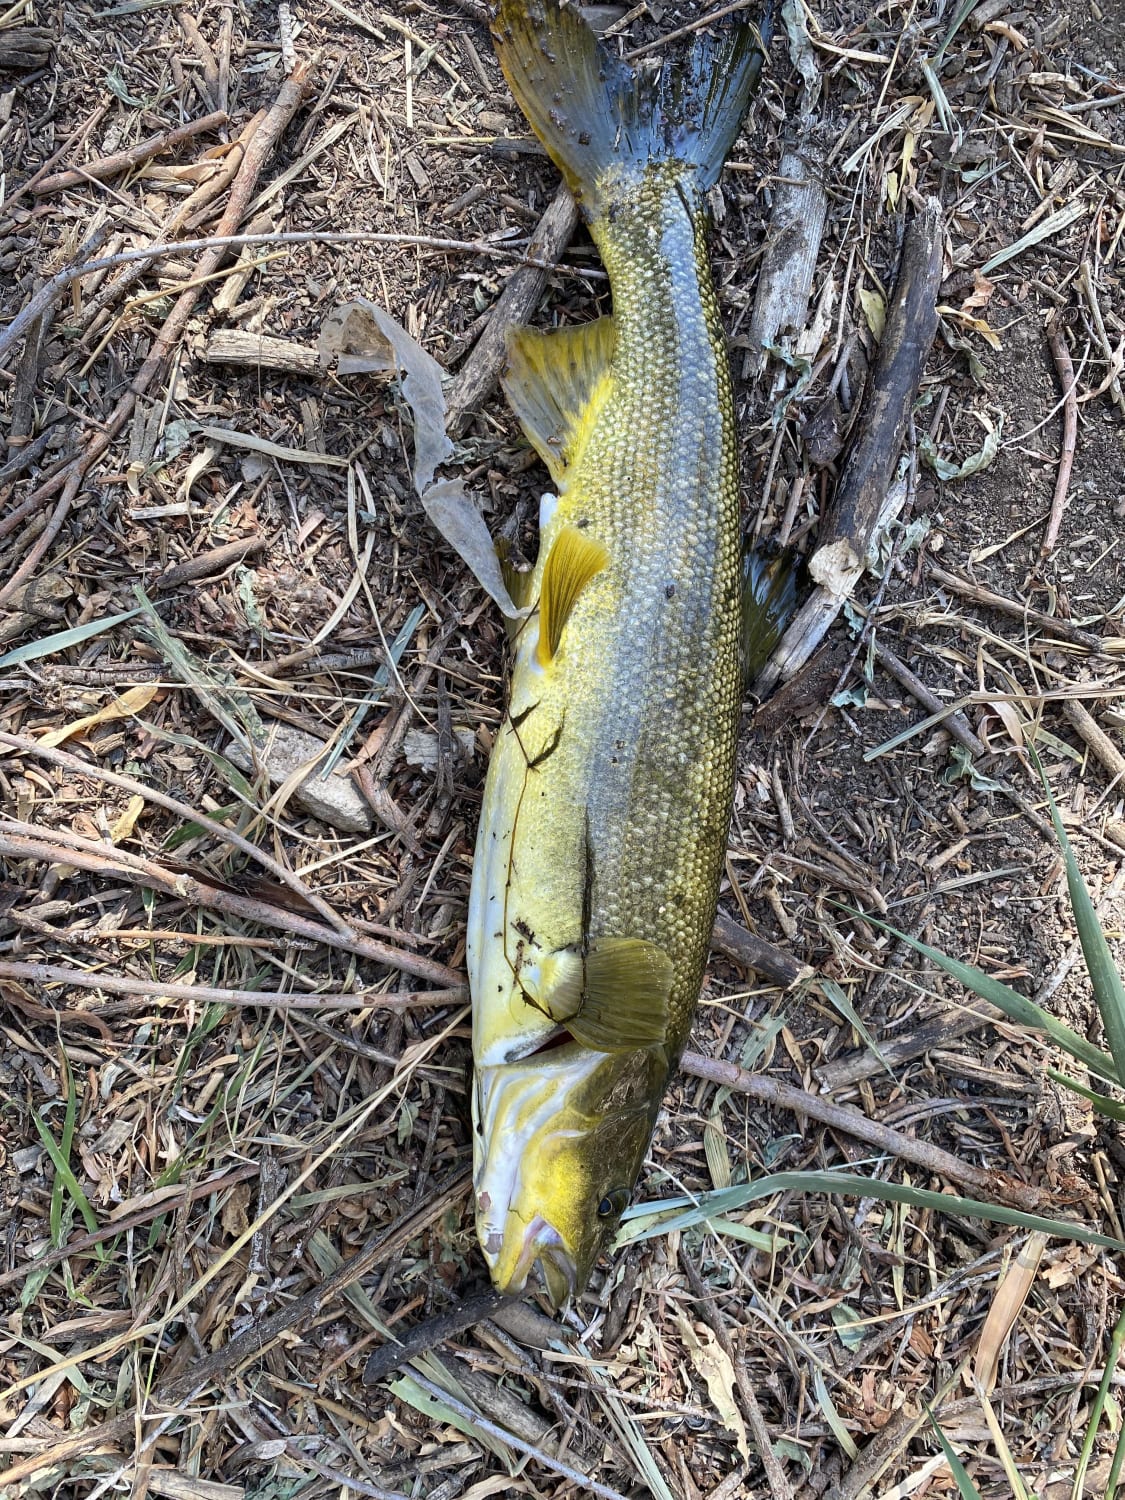 I’m new to Idaho. Caught in the Snake river. Was only out of the water long enough to remove the hook and snap a pic. Could I get some help with identifying?